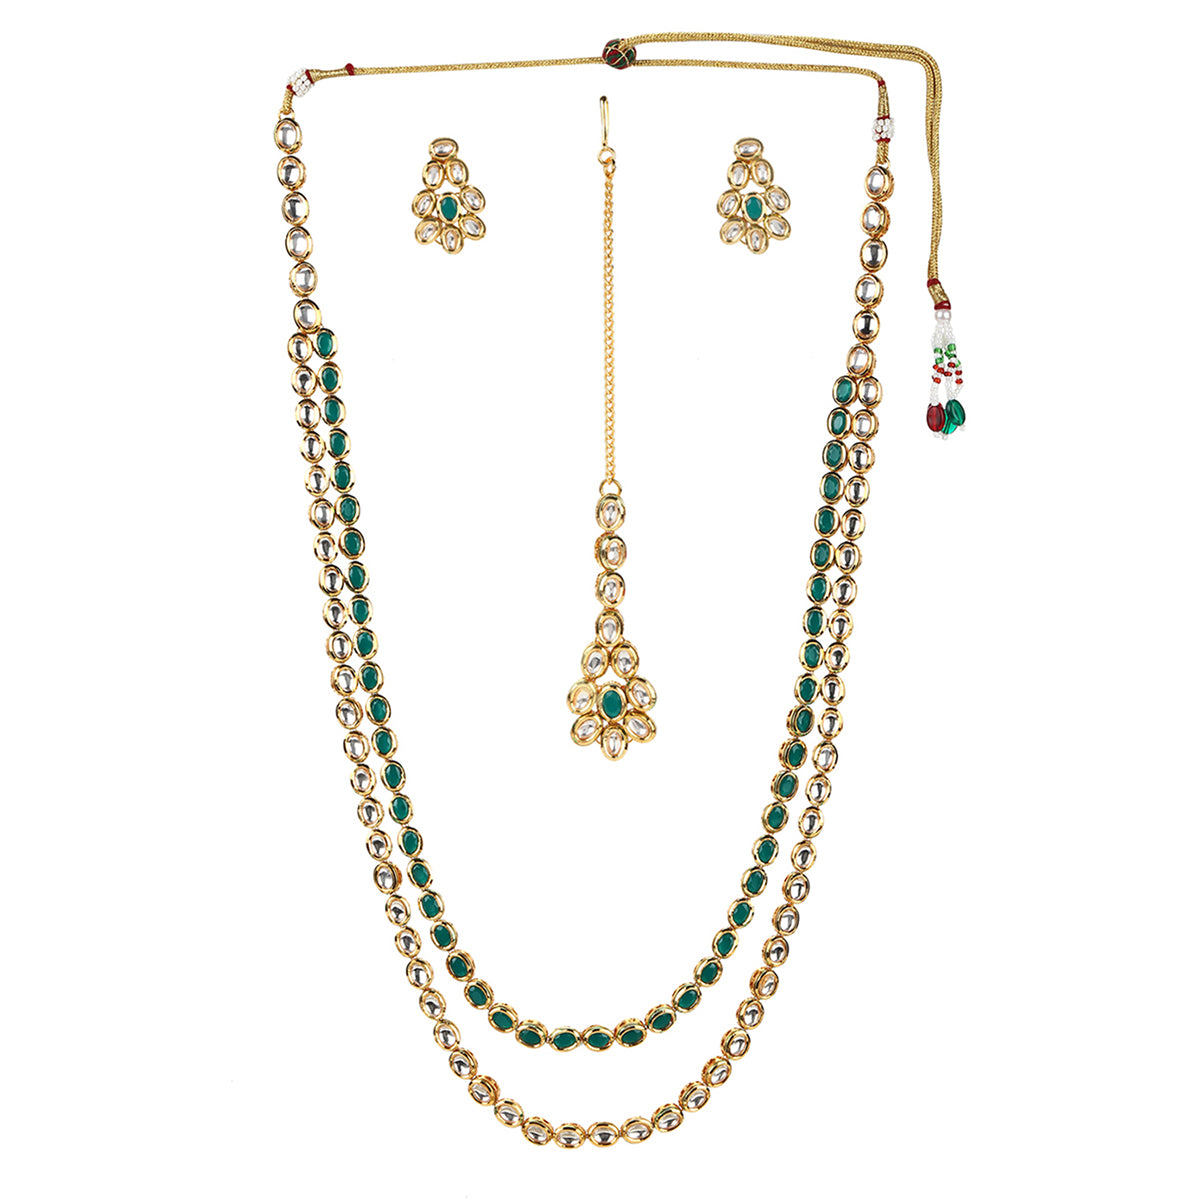 Kundan Gold Plated Long Necklace Set with Green Stones